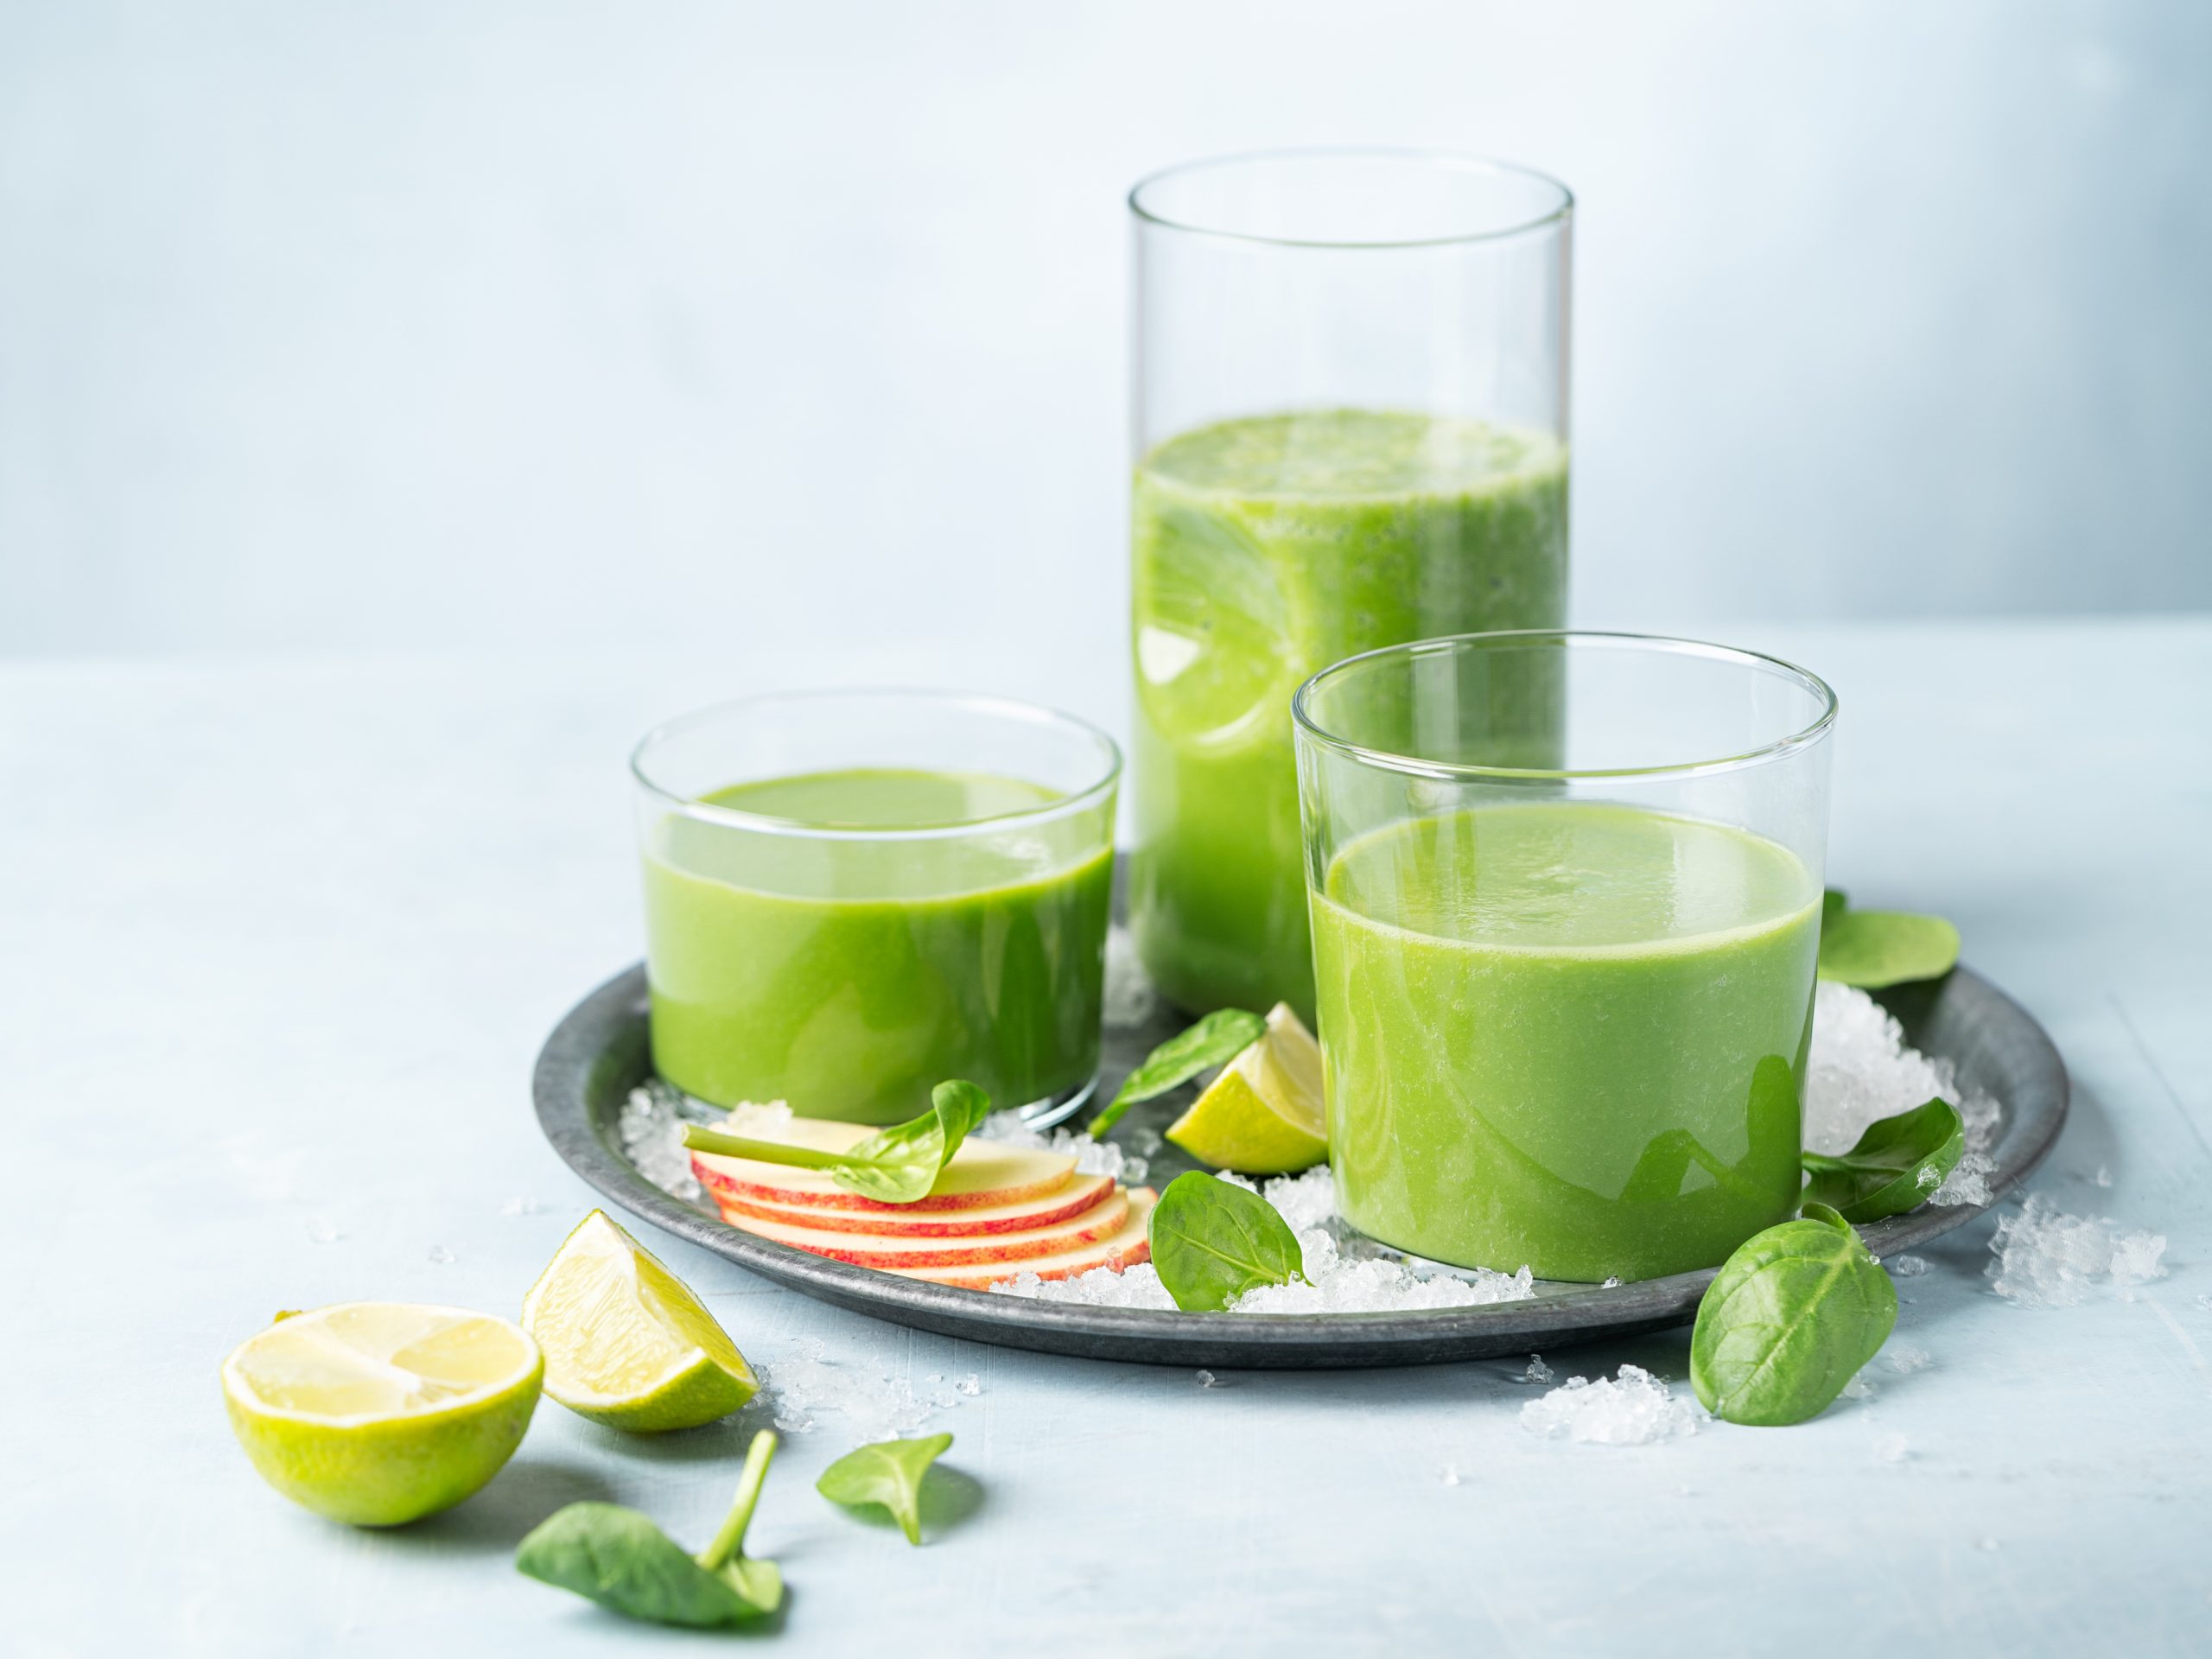 Peach and Pear Green Smoothie